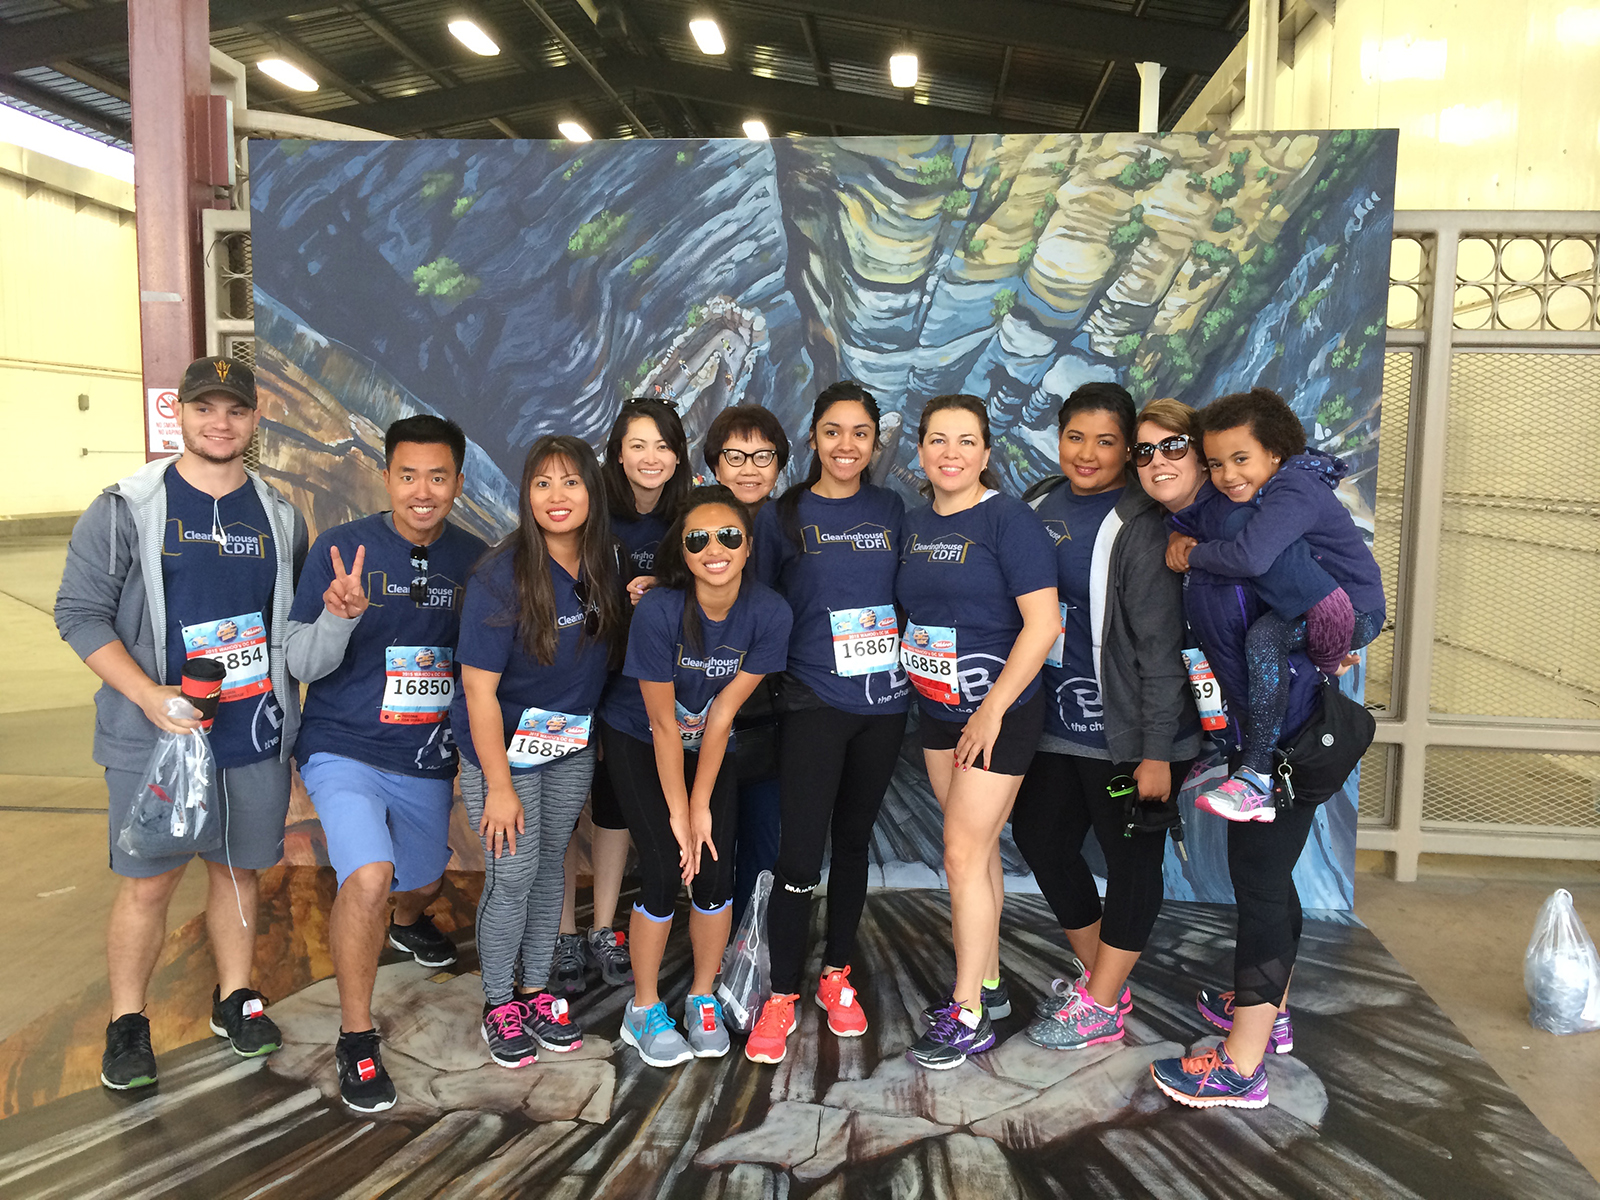 2015 OC Marathon - Clearinghouse CDFI & Affordable Housing Clearinghouse Staff get ready for the 2015 OC Marathon